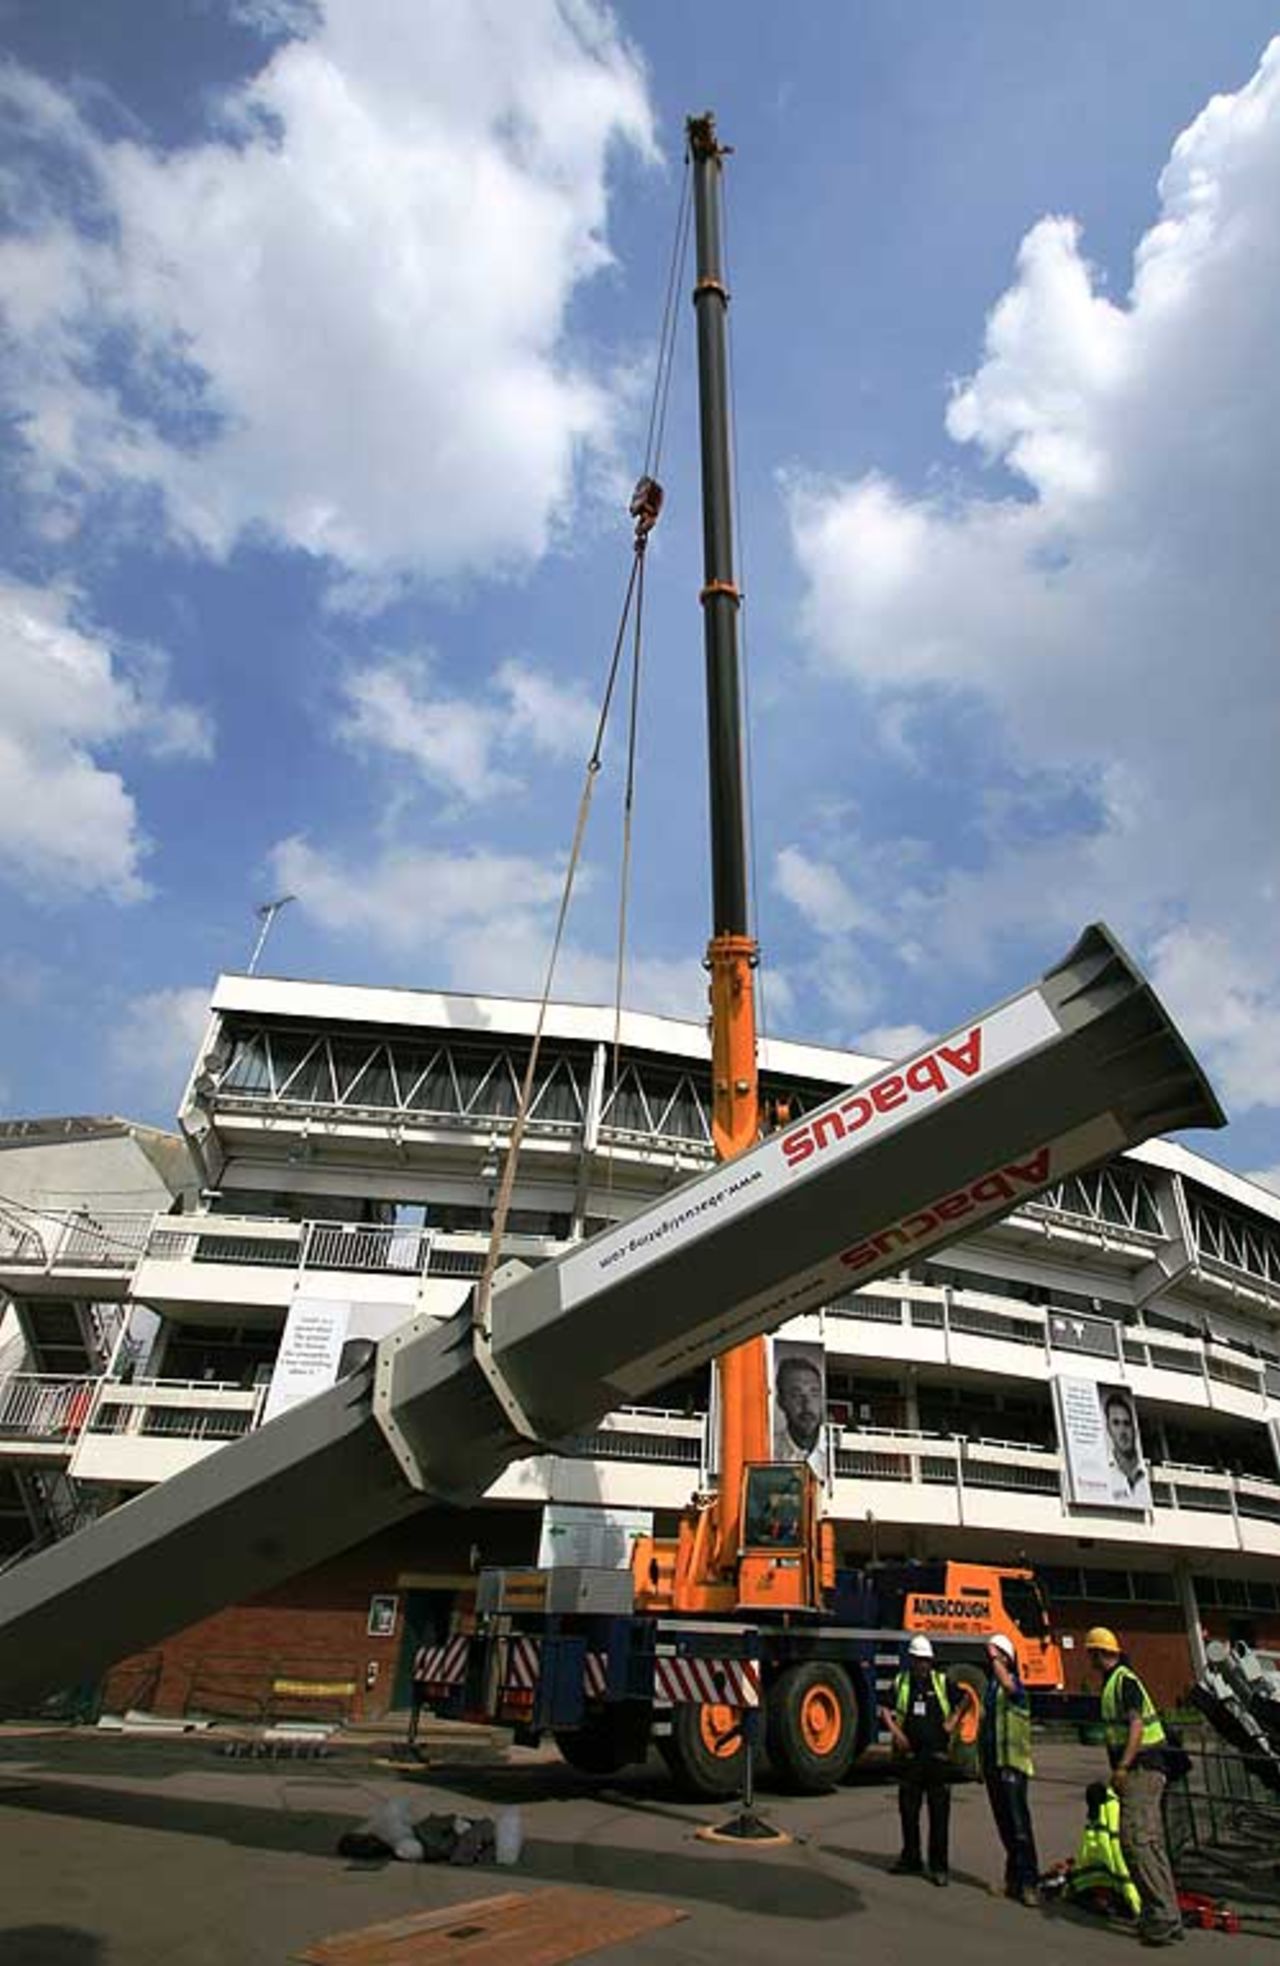 The Grace Gate floodlight being lowered into place at Lord's, April 6, 2009